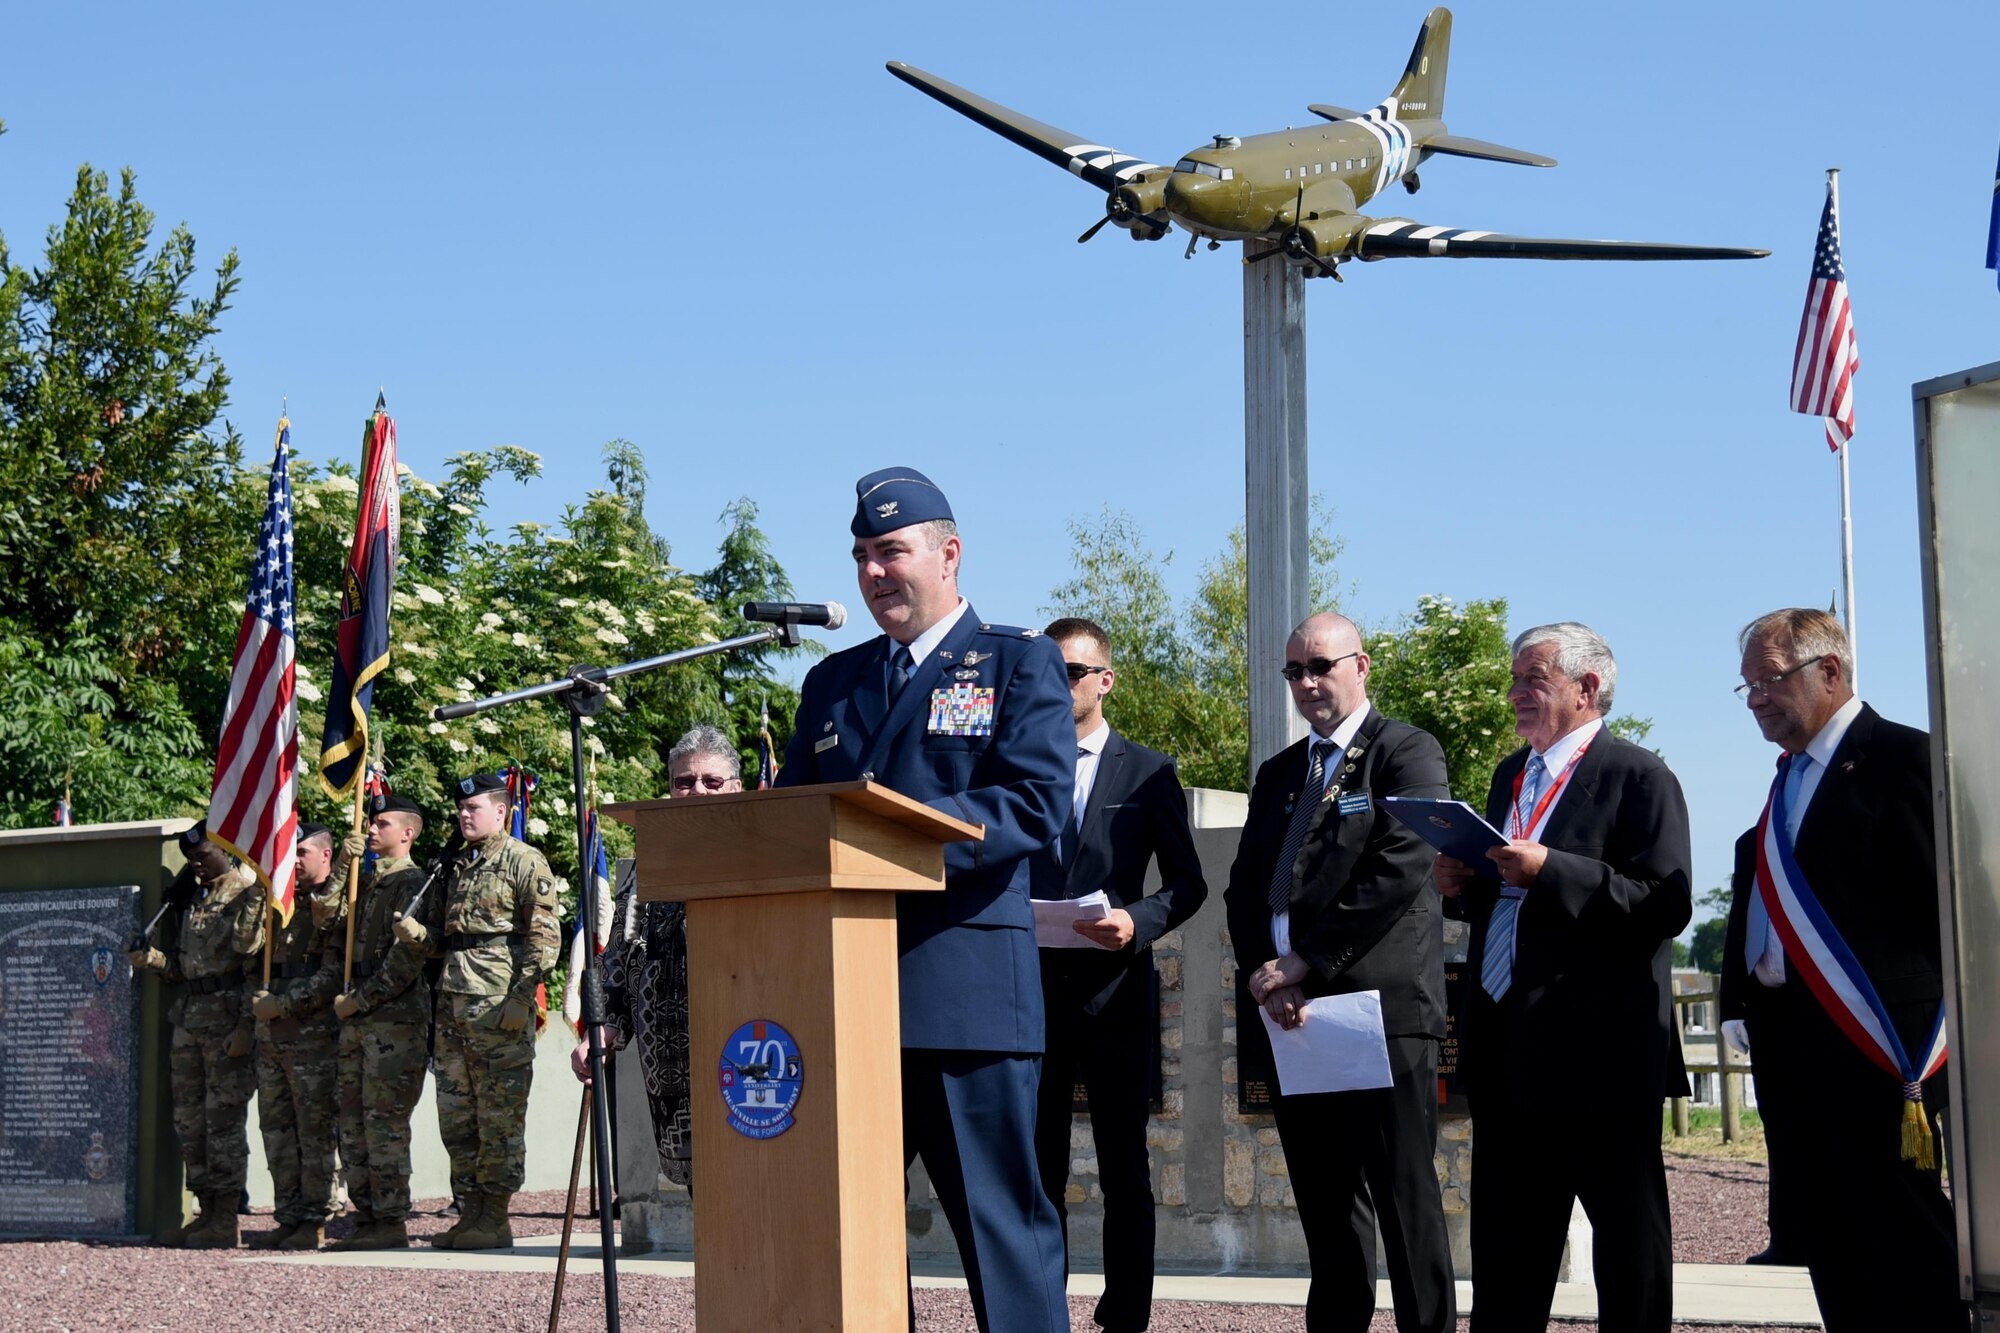 Col. Brian May, commander of the 403rd Operation Group, gives a speech during a ceremony in Picauville, France. This ceremony commemorates the 73rd anniversary of D-Day, the largest multi-national amphibious landing and operational military airdrop in history, and highlights the U.S.' steadfast commitment to European allies and partners. Overall, approximately 400 U.S. service members from units in Europe and the U.S. are participating in ceremonial D-Day events from May 31 to June 7, 2017(U.S. Air Force photo by Staff Sgt. Nicholas Monteleone)